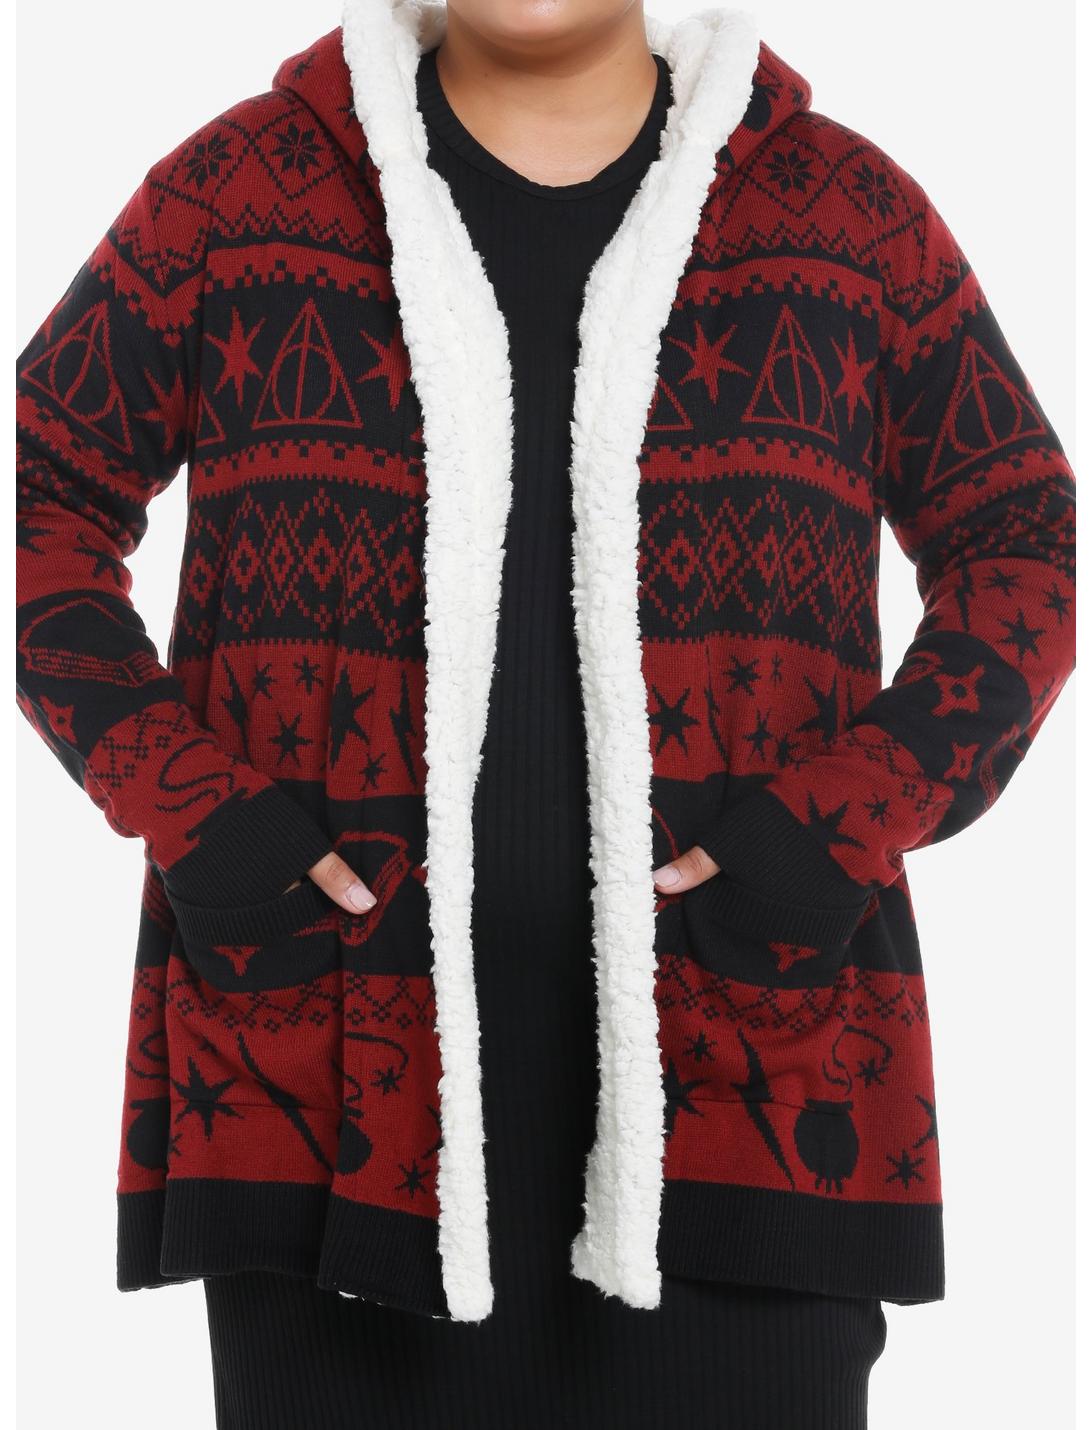 Harry Potter Deathly Hallows Fair Isle Sherpa Open Cardigan Plus Size, RED  BLACK, hi-res